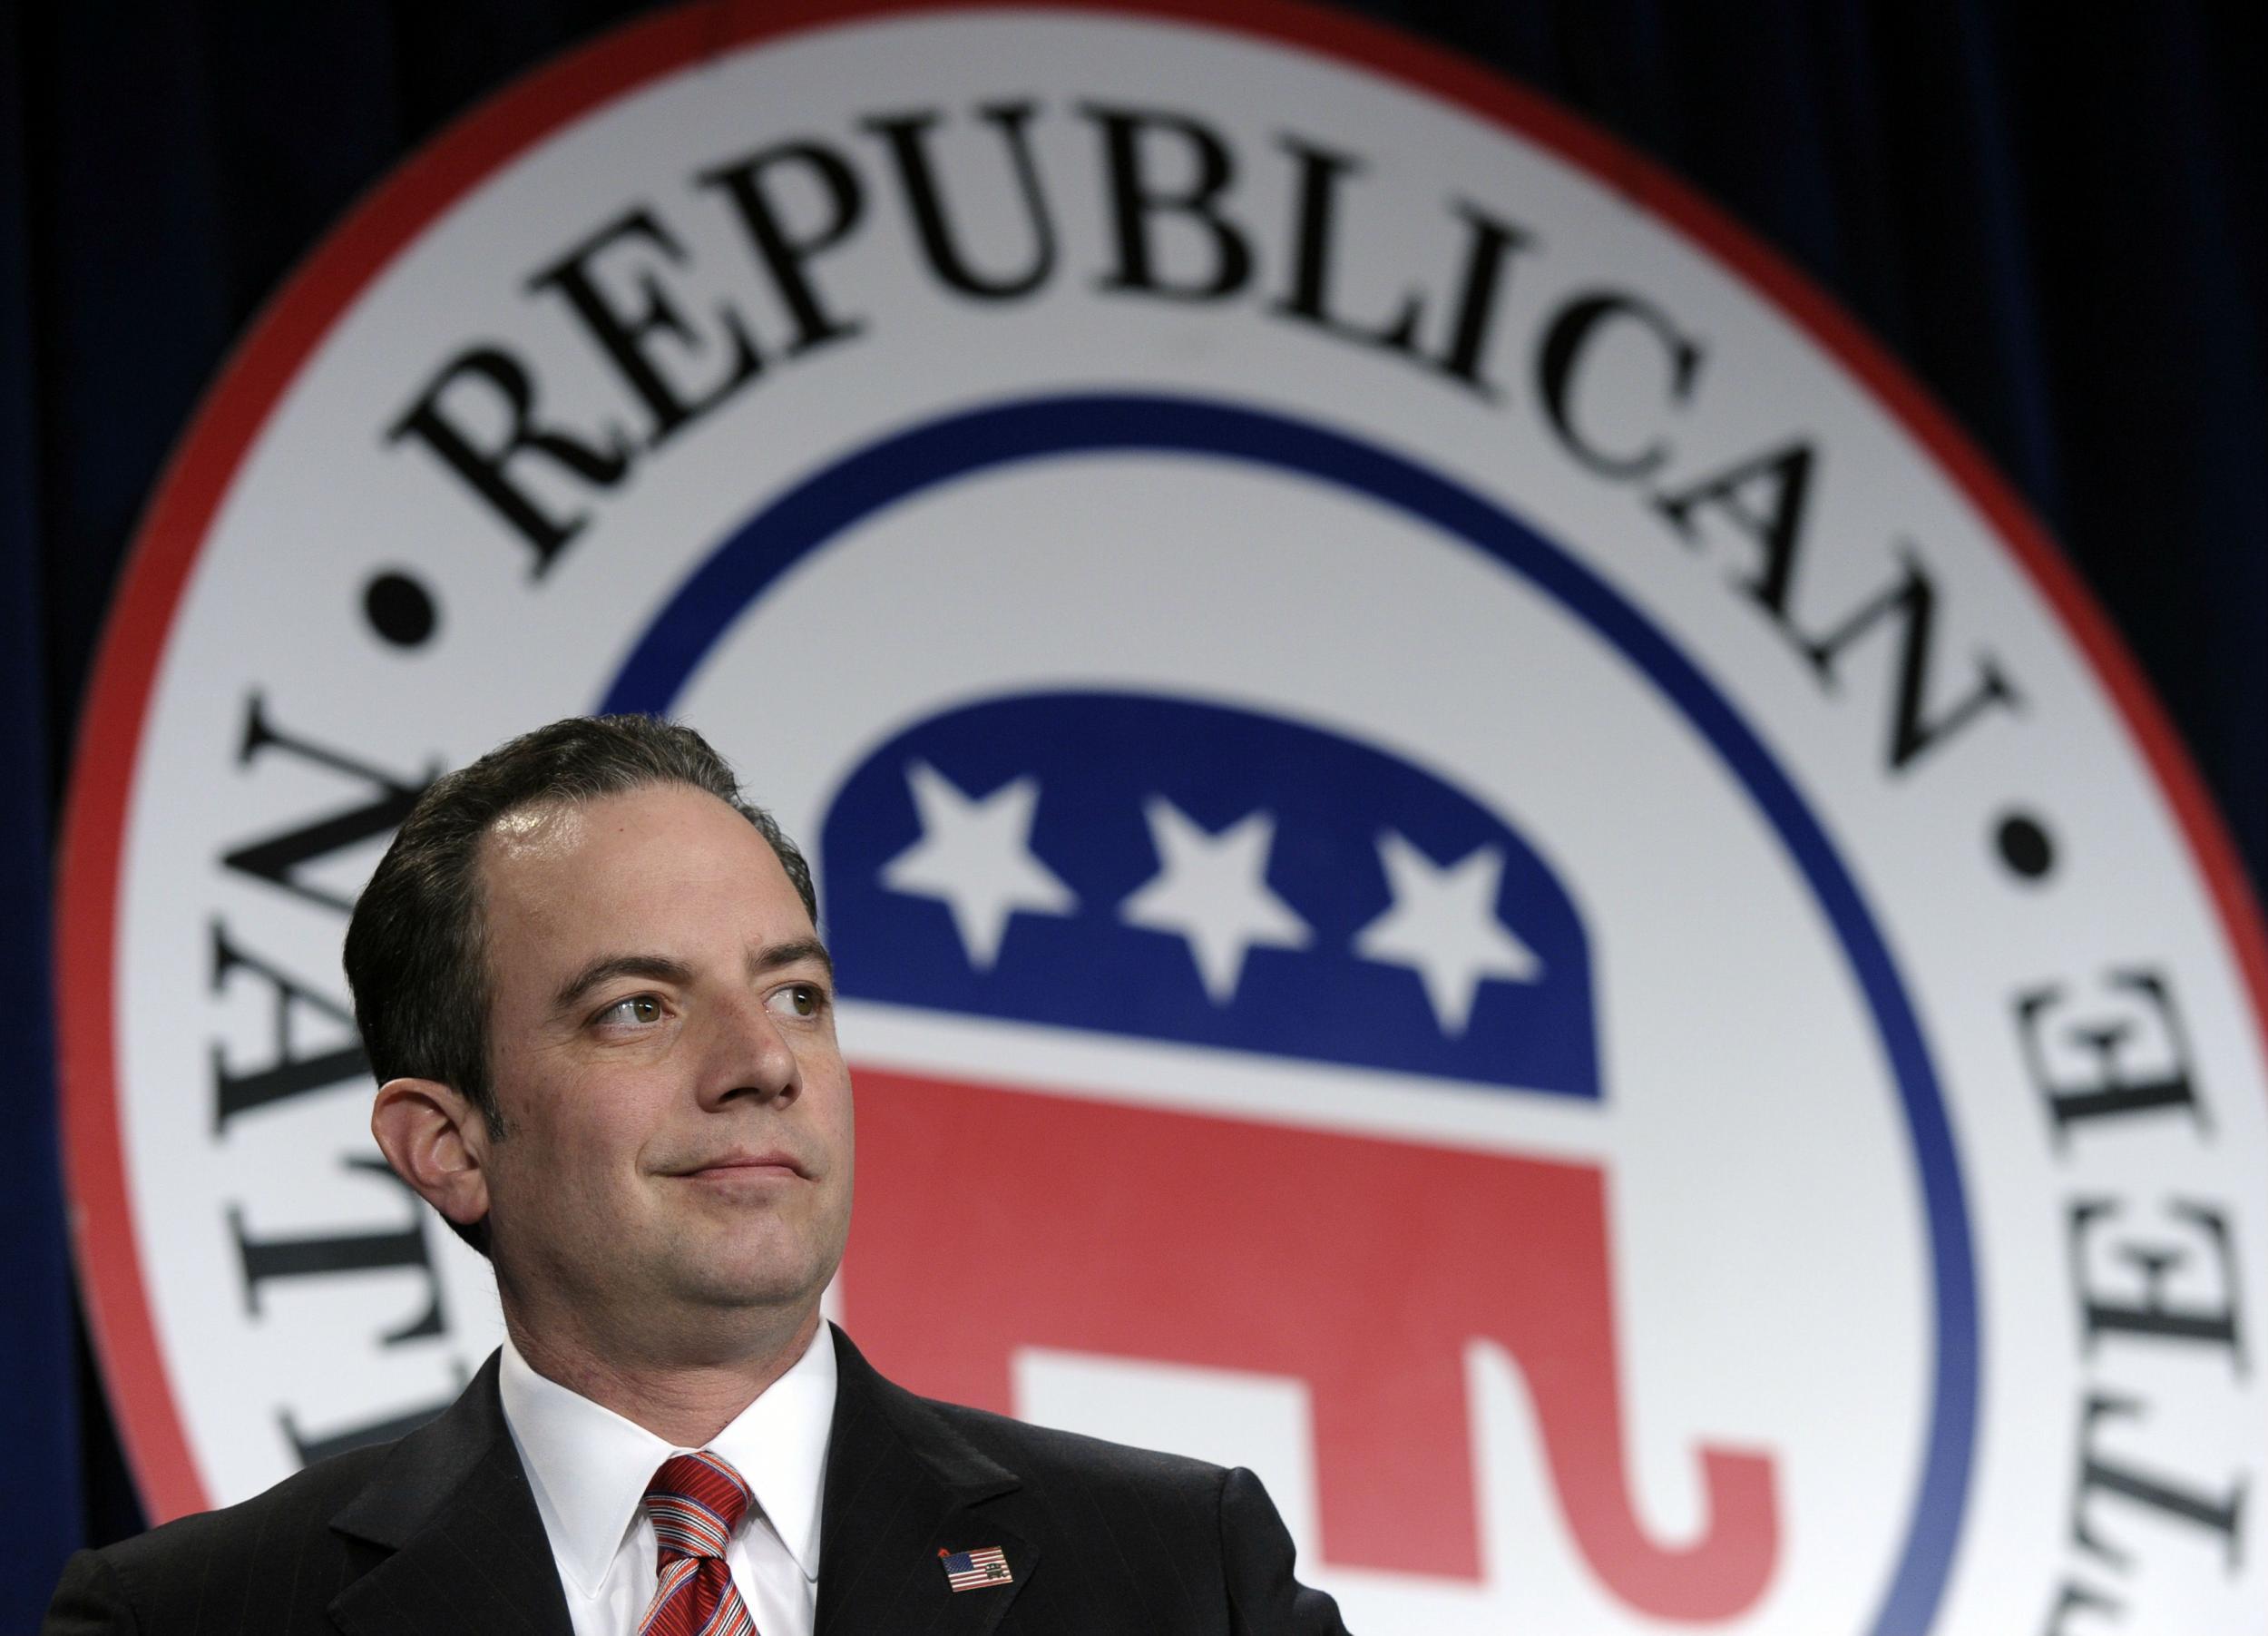 Reince Priebus, chairman of the Republican National Committee, is trying to keep everyone happy